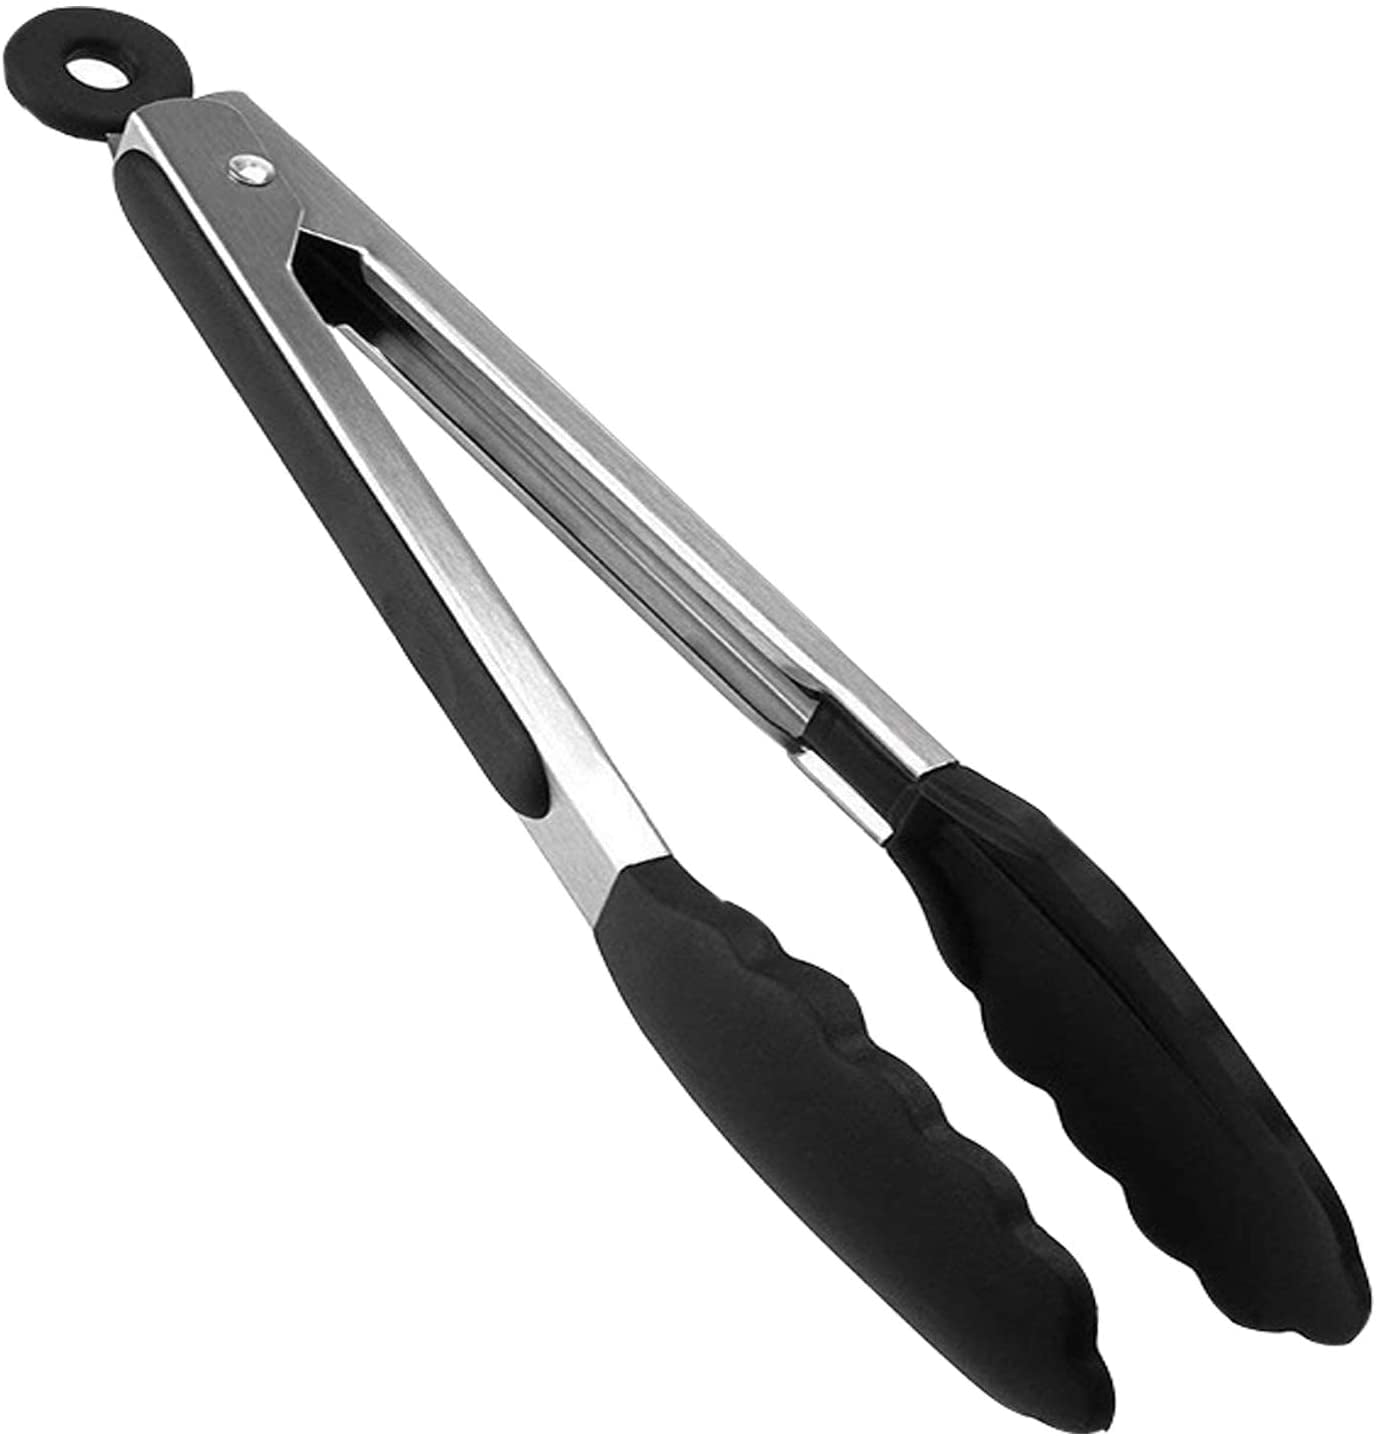 Kitchen Tongs, Stainless Steel with Non-Stick Silicone Tips, Set of 3  Utensils for Cooking, Barbecue, Grilling, Serving, Salad by Classic Cuisine  